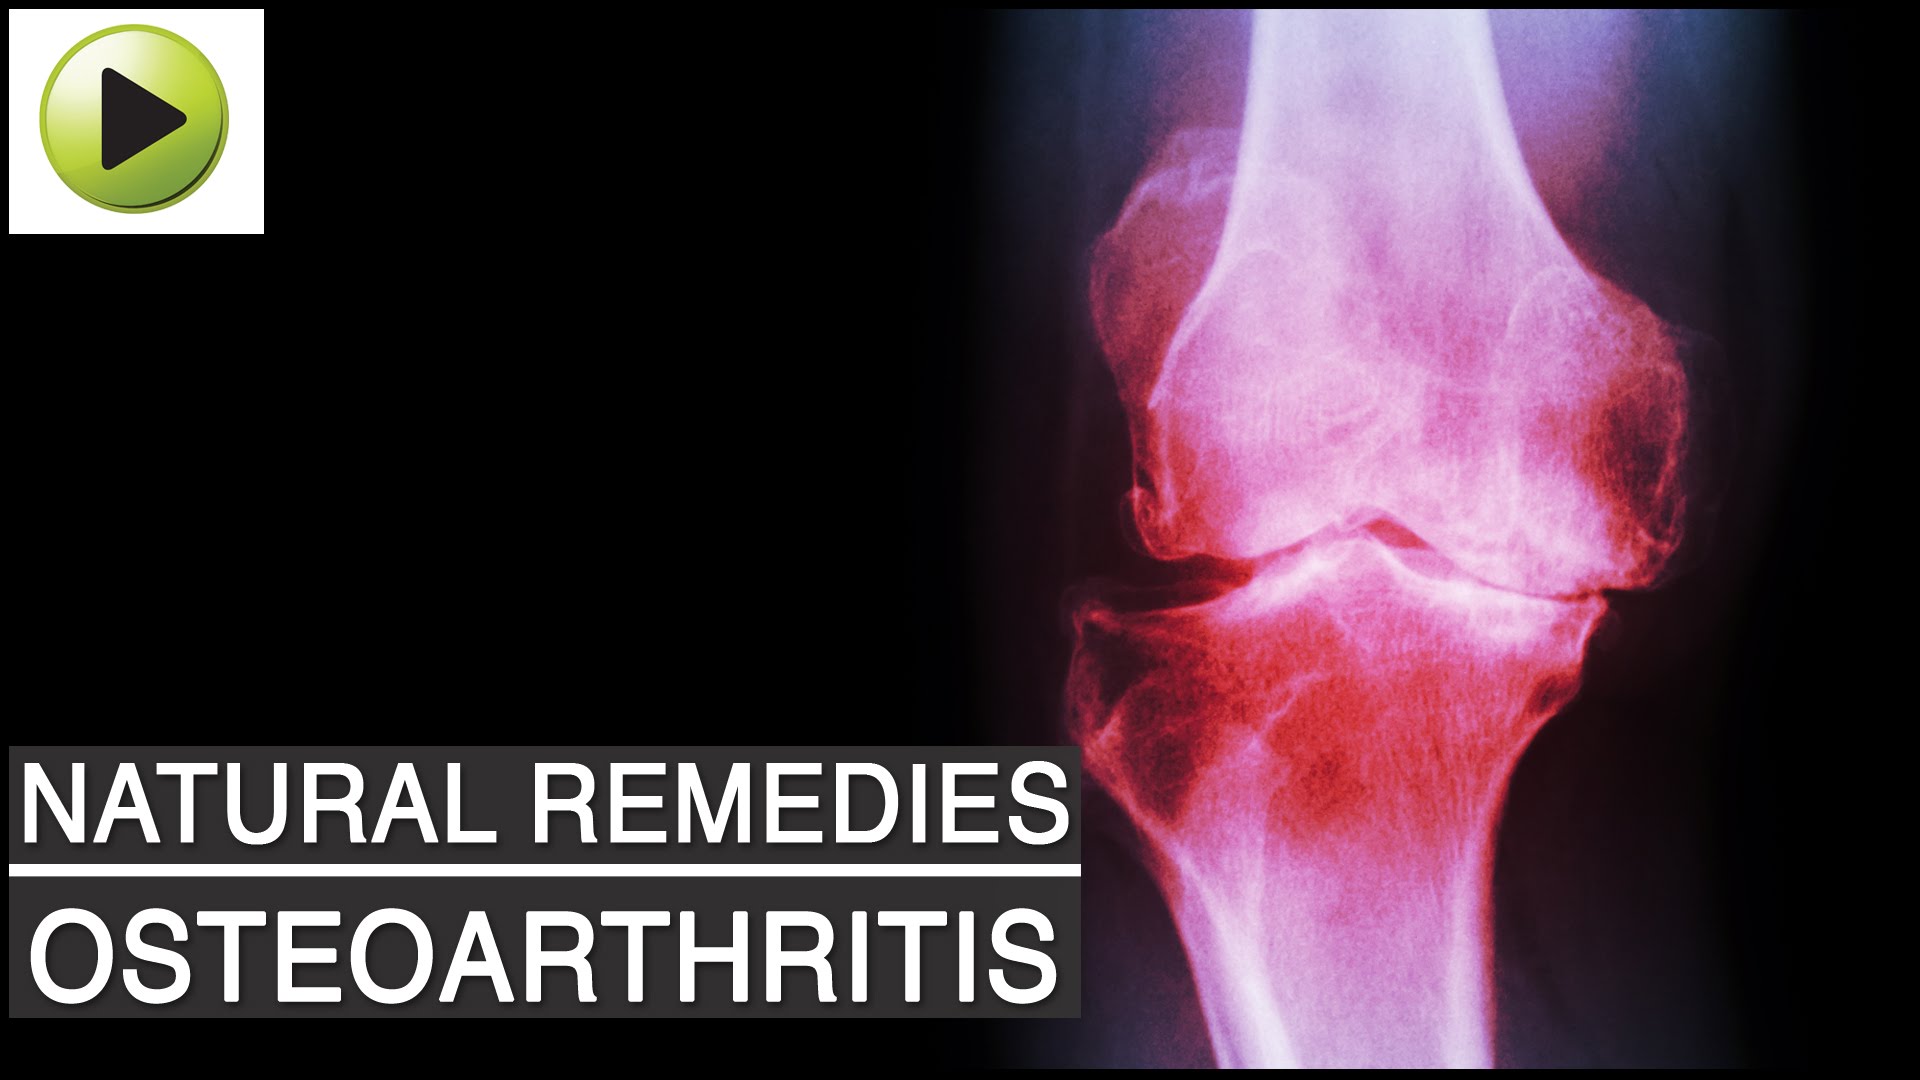 Aches & Pains – Osteoarthritis (Arthritis or Joint Pain) – Natural Ayurvedic Home Remedies